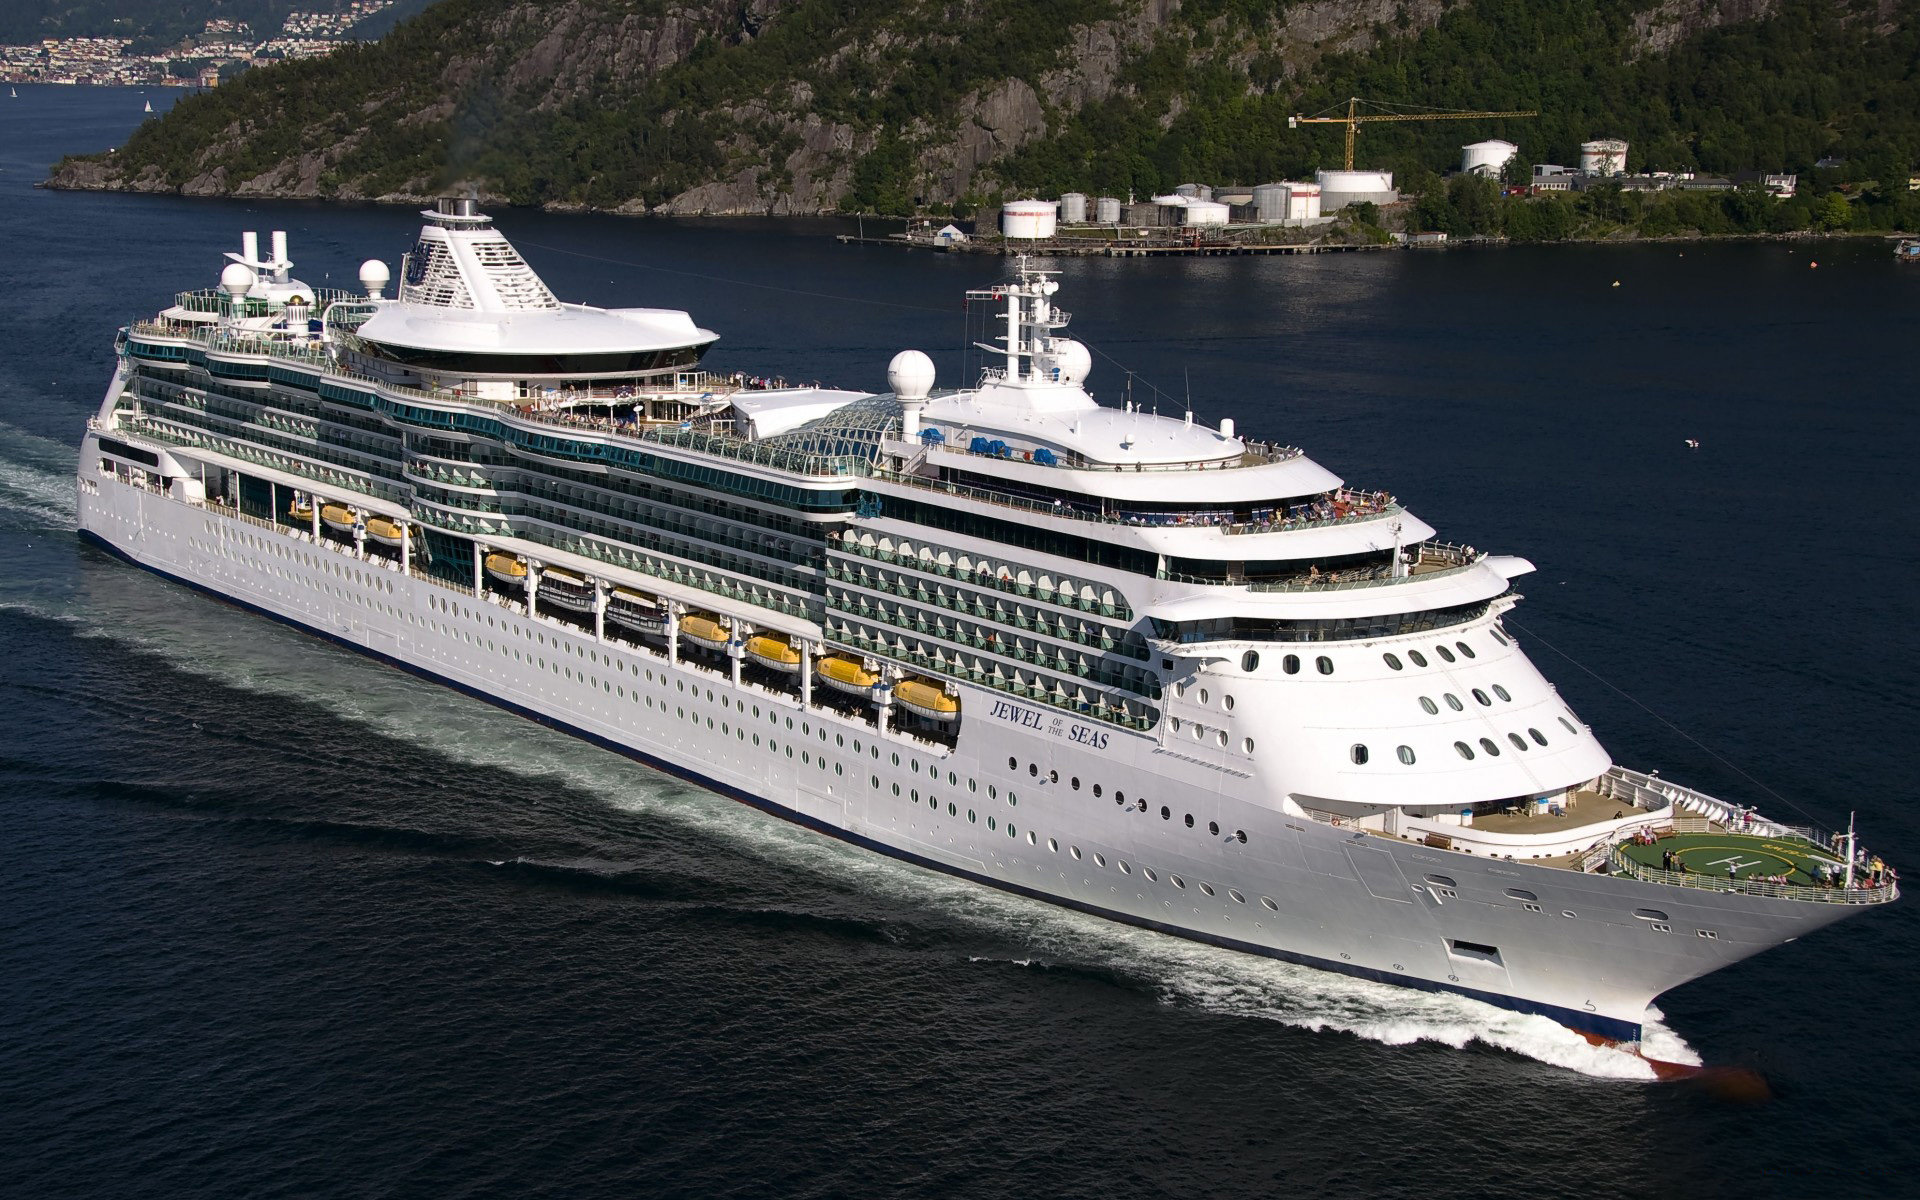 High Resolution Cruise Ship Hd 1920x1200 Wallpaper Id 493490 For Pc Images, Photos, Reviews